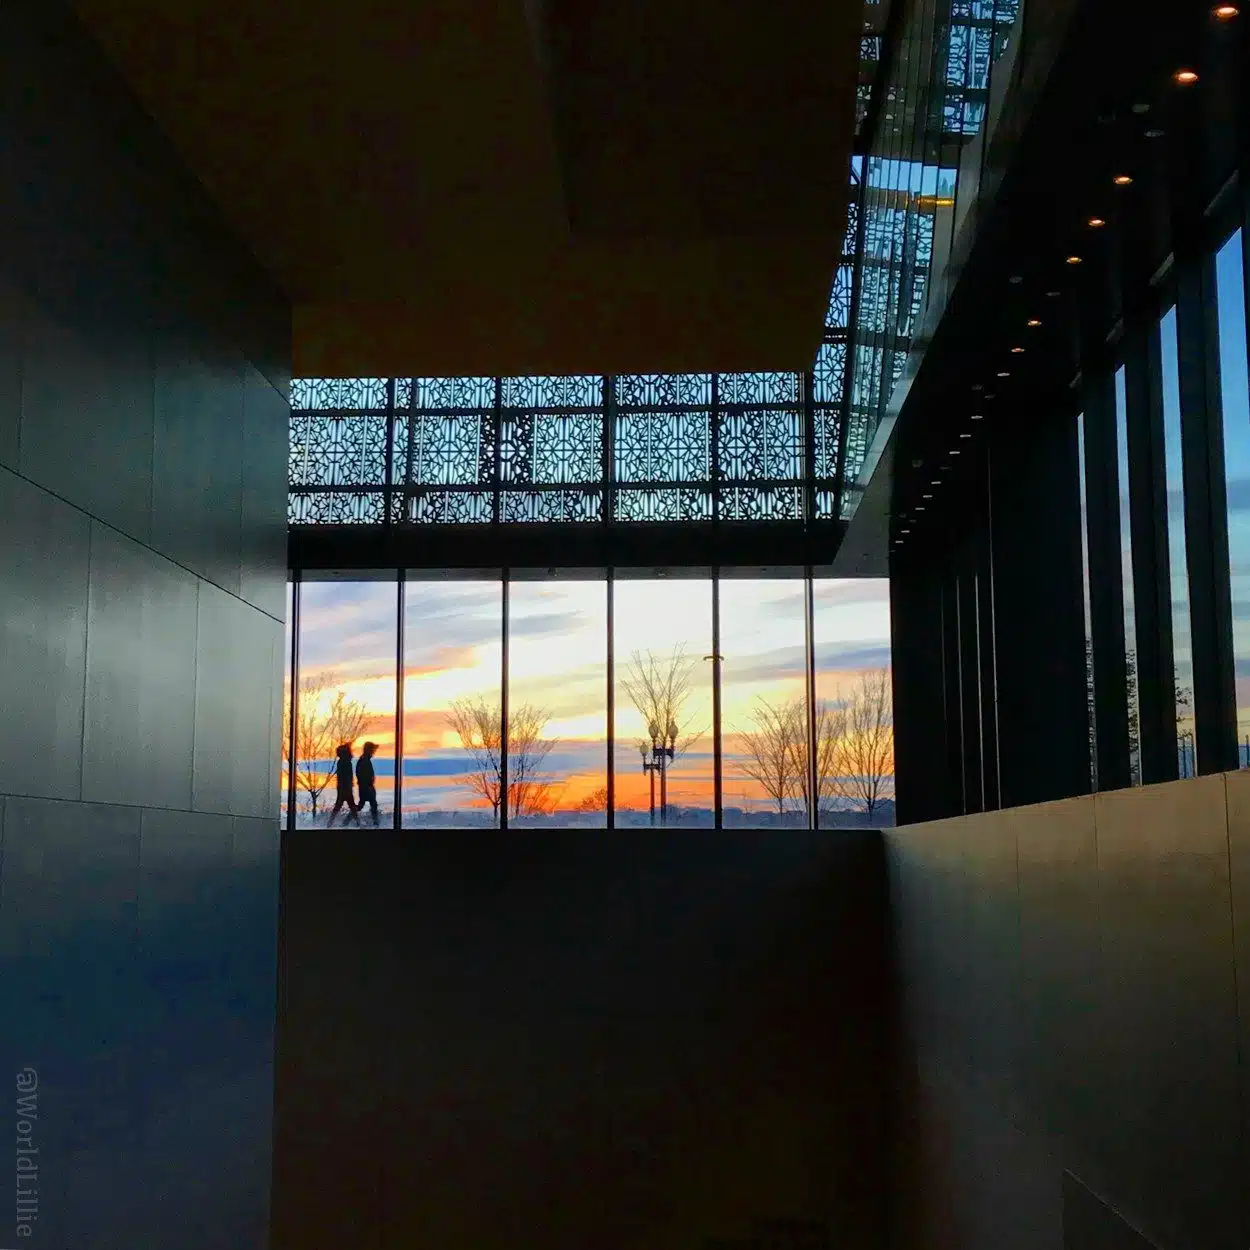 Sunset at DC's phenomenal National Museum of African-American History and Culture, which I visited in December.